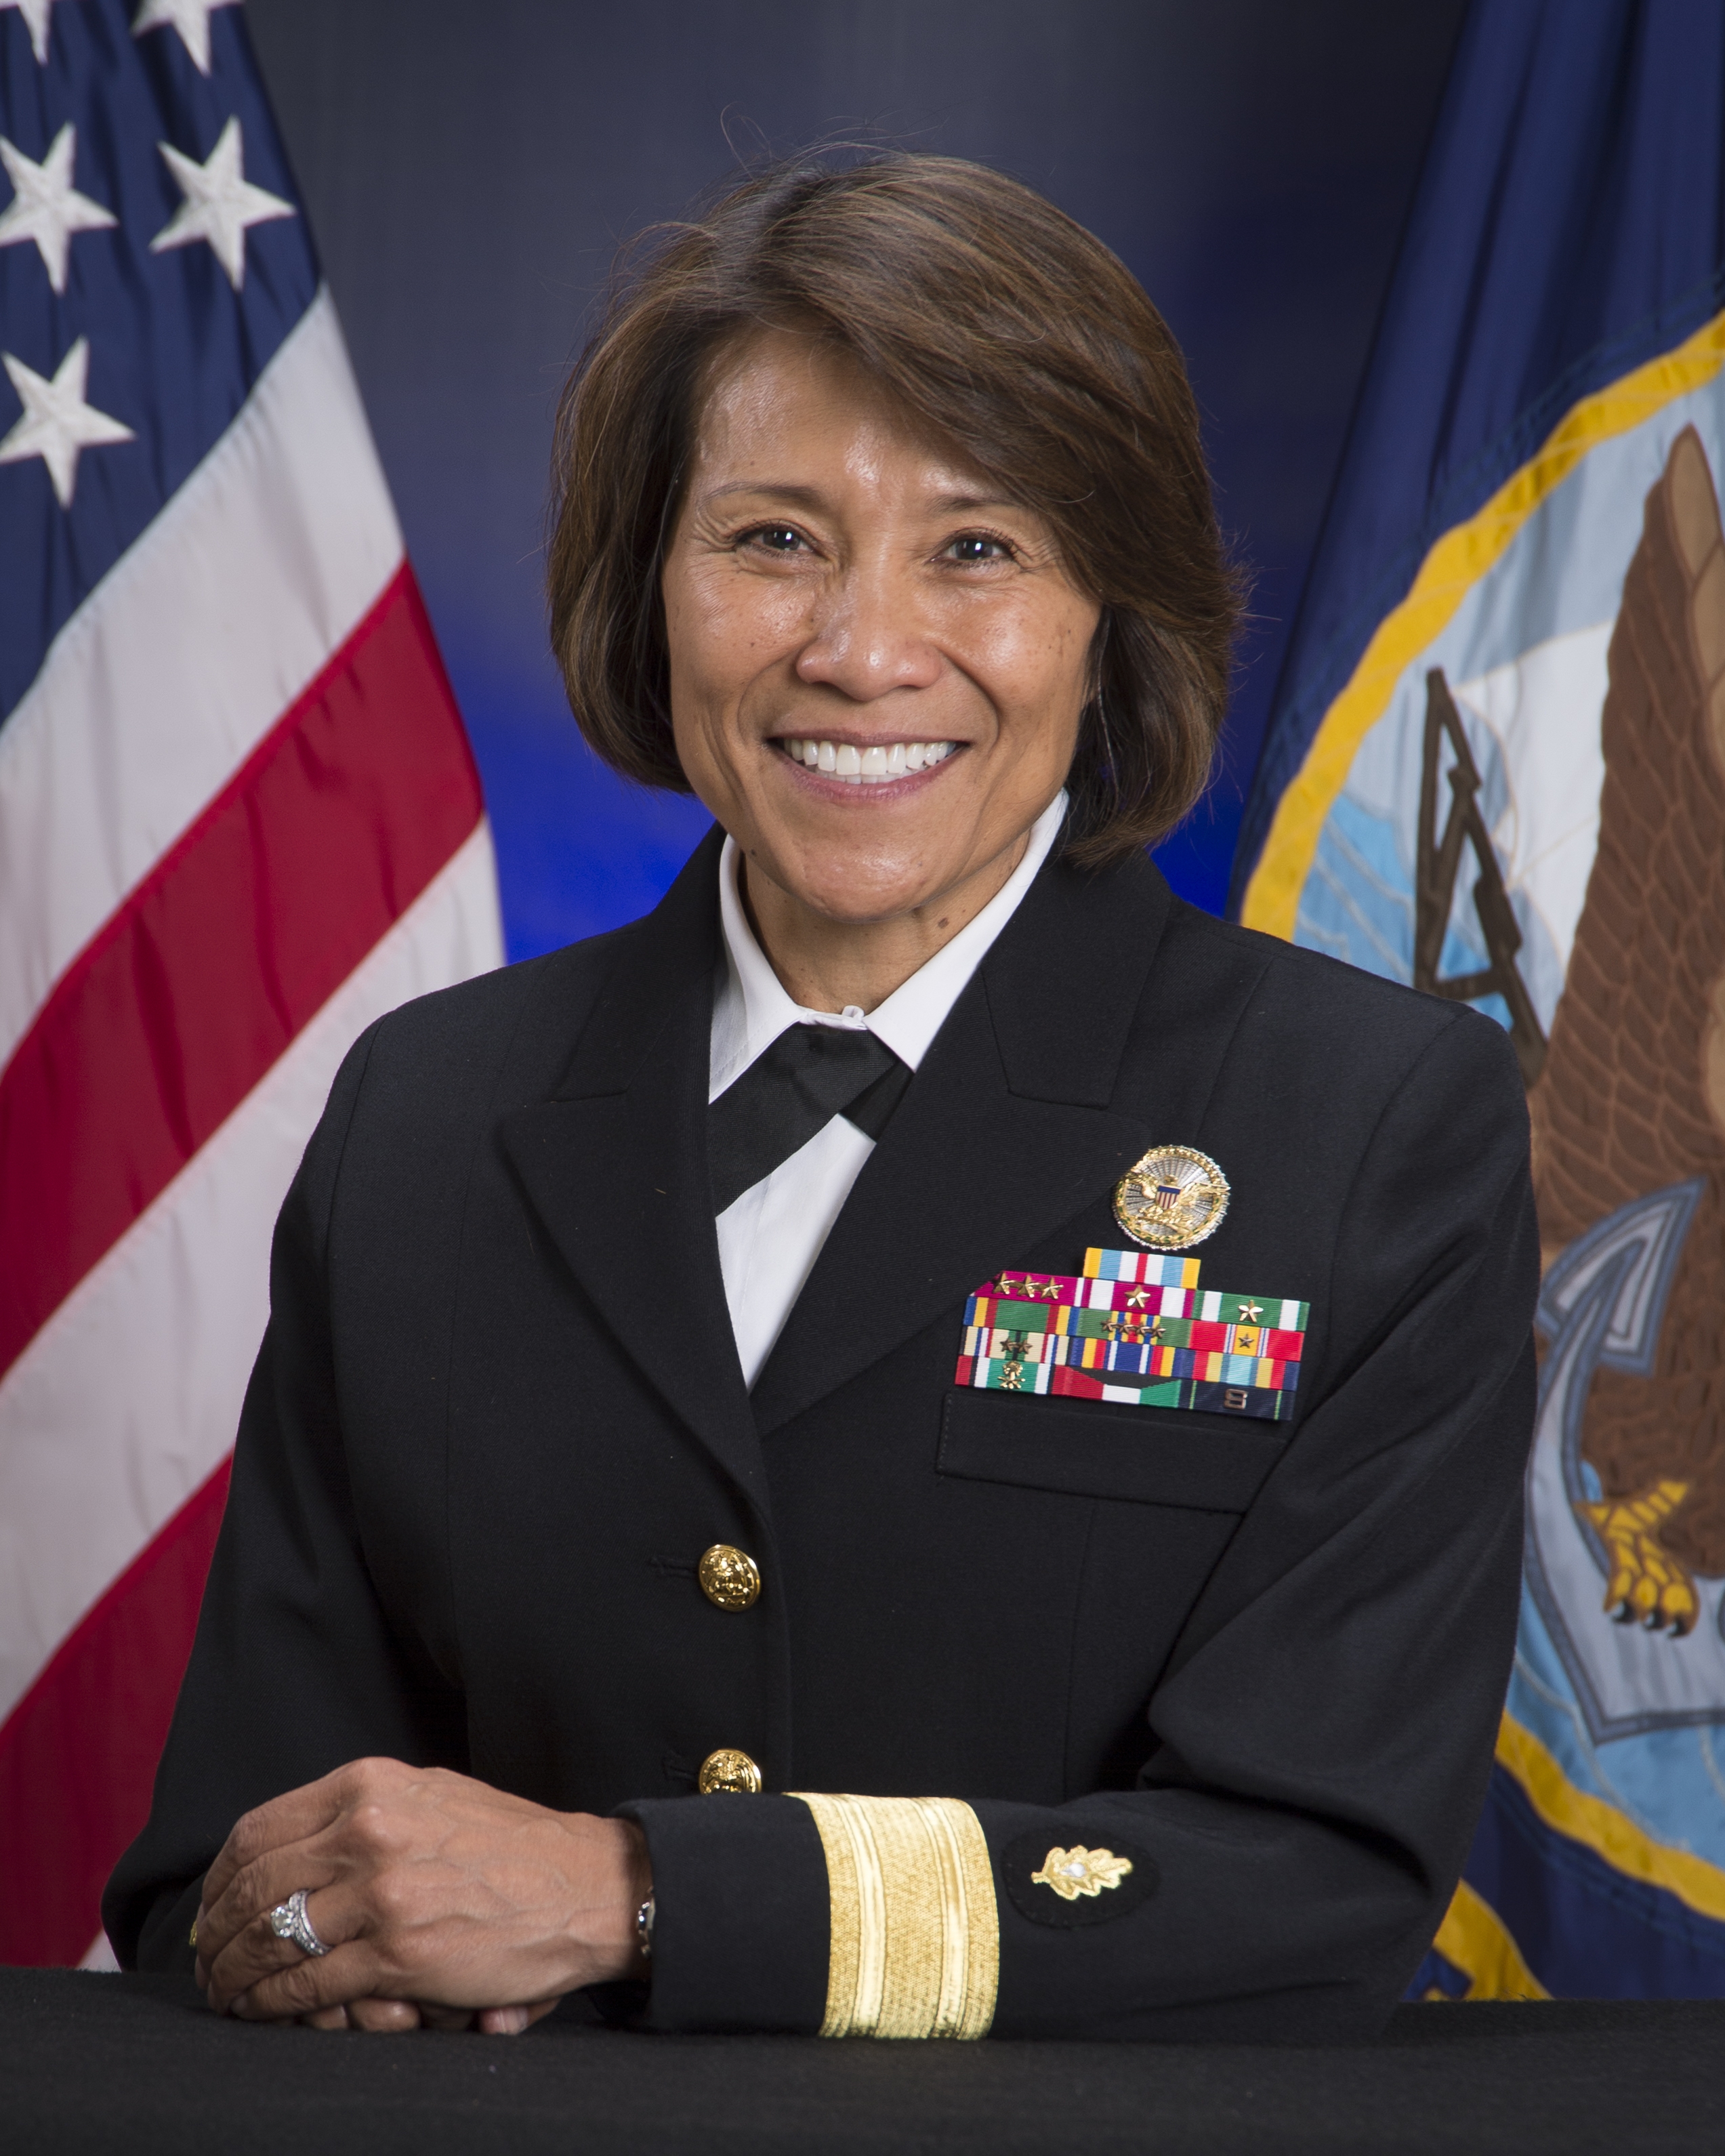 Rear Admiral Raquel Bono, Chief, Medical Corps, United States Navy (Photo courtesy of the U.S. Navy)